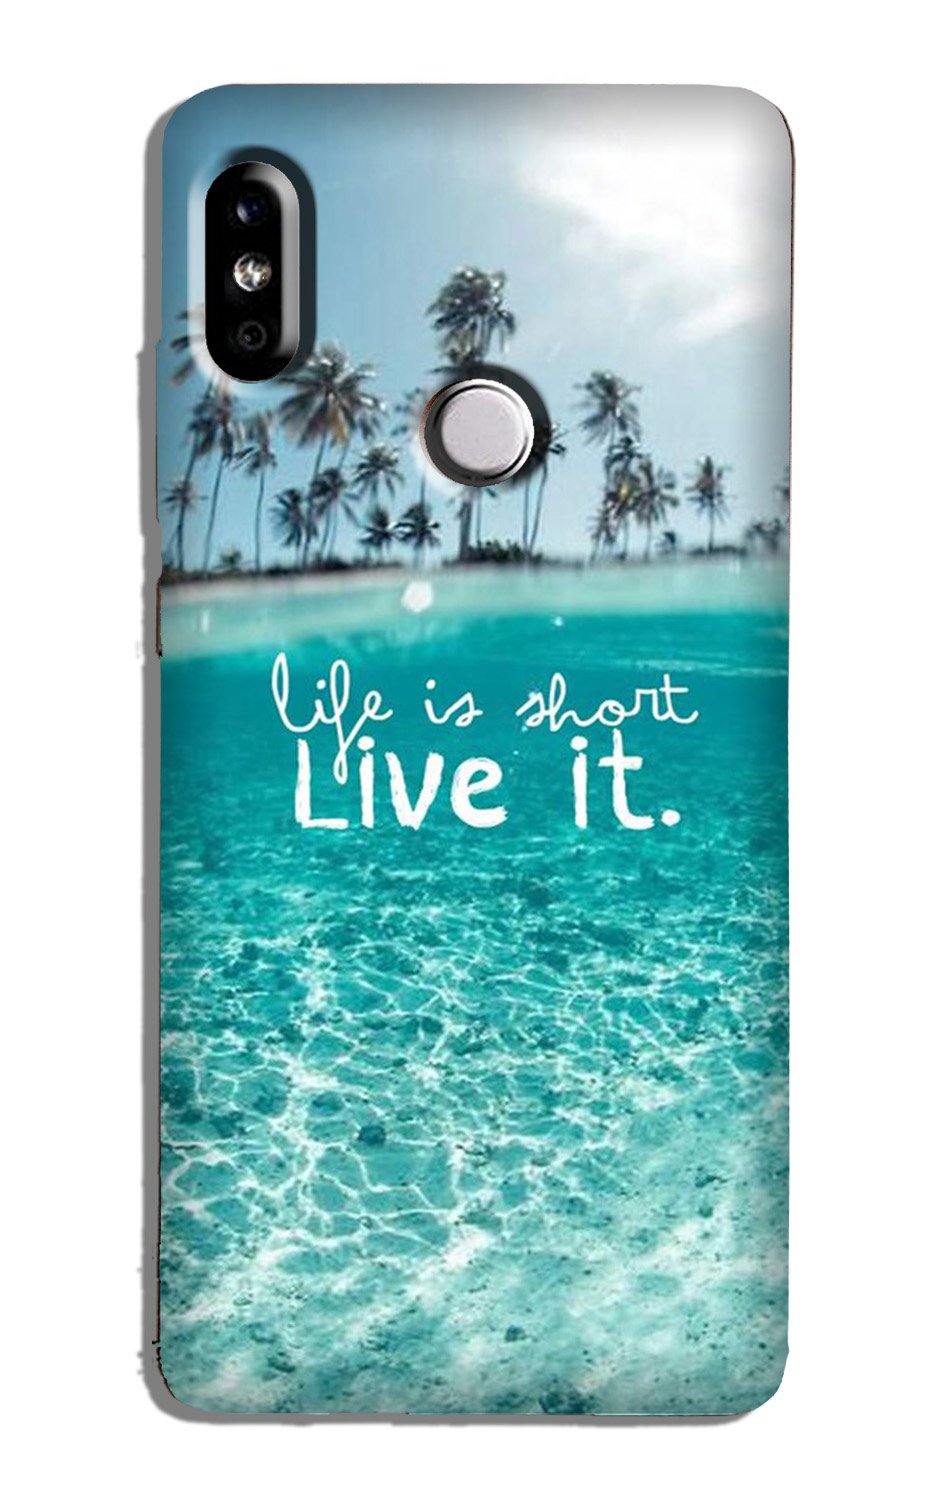 Life is short live it Case for Xiaomi Redmi 7